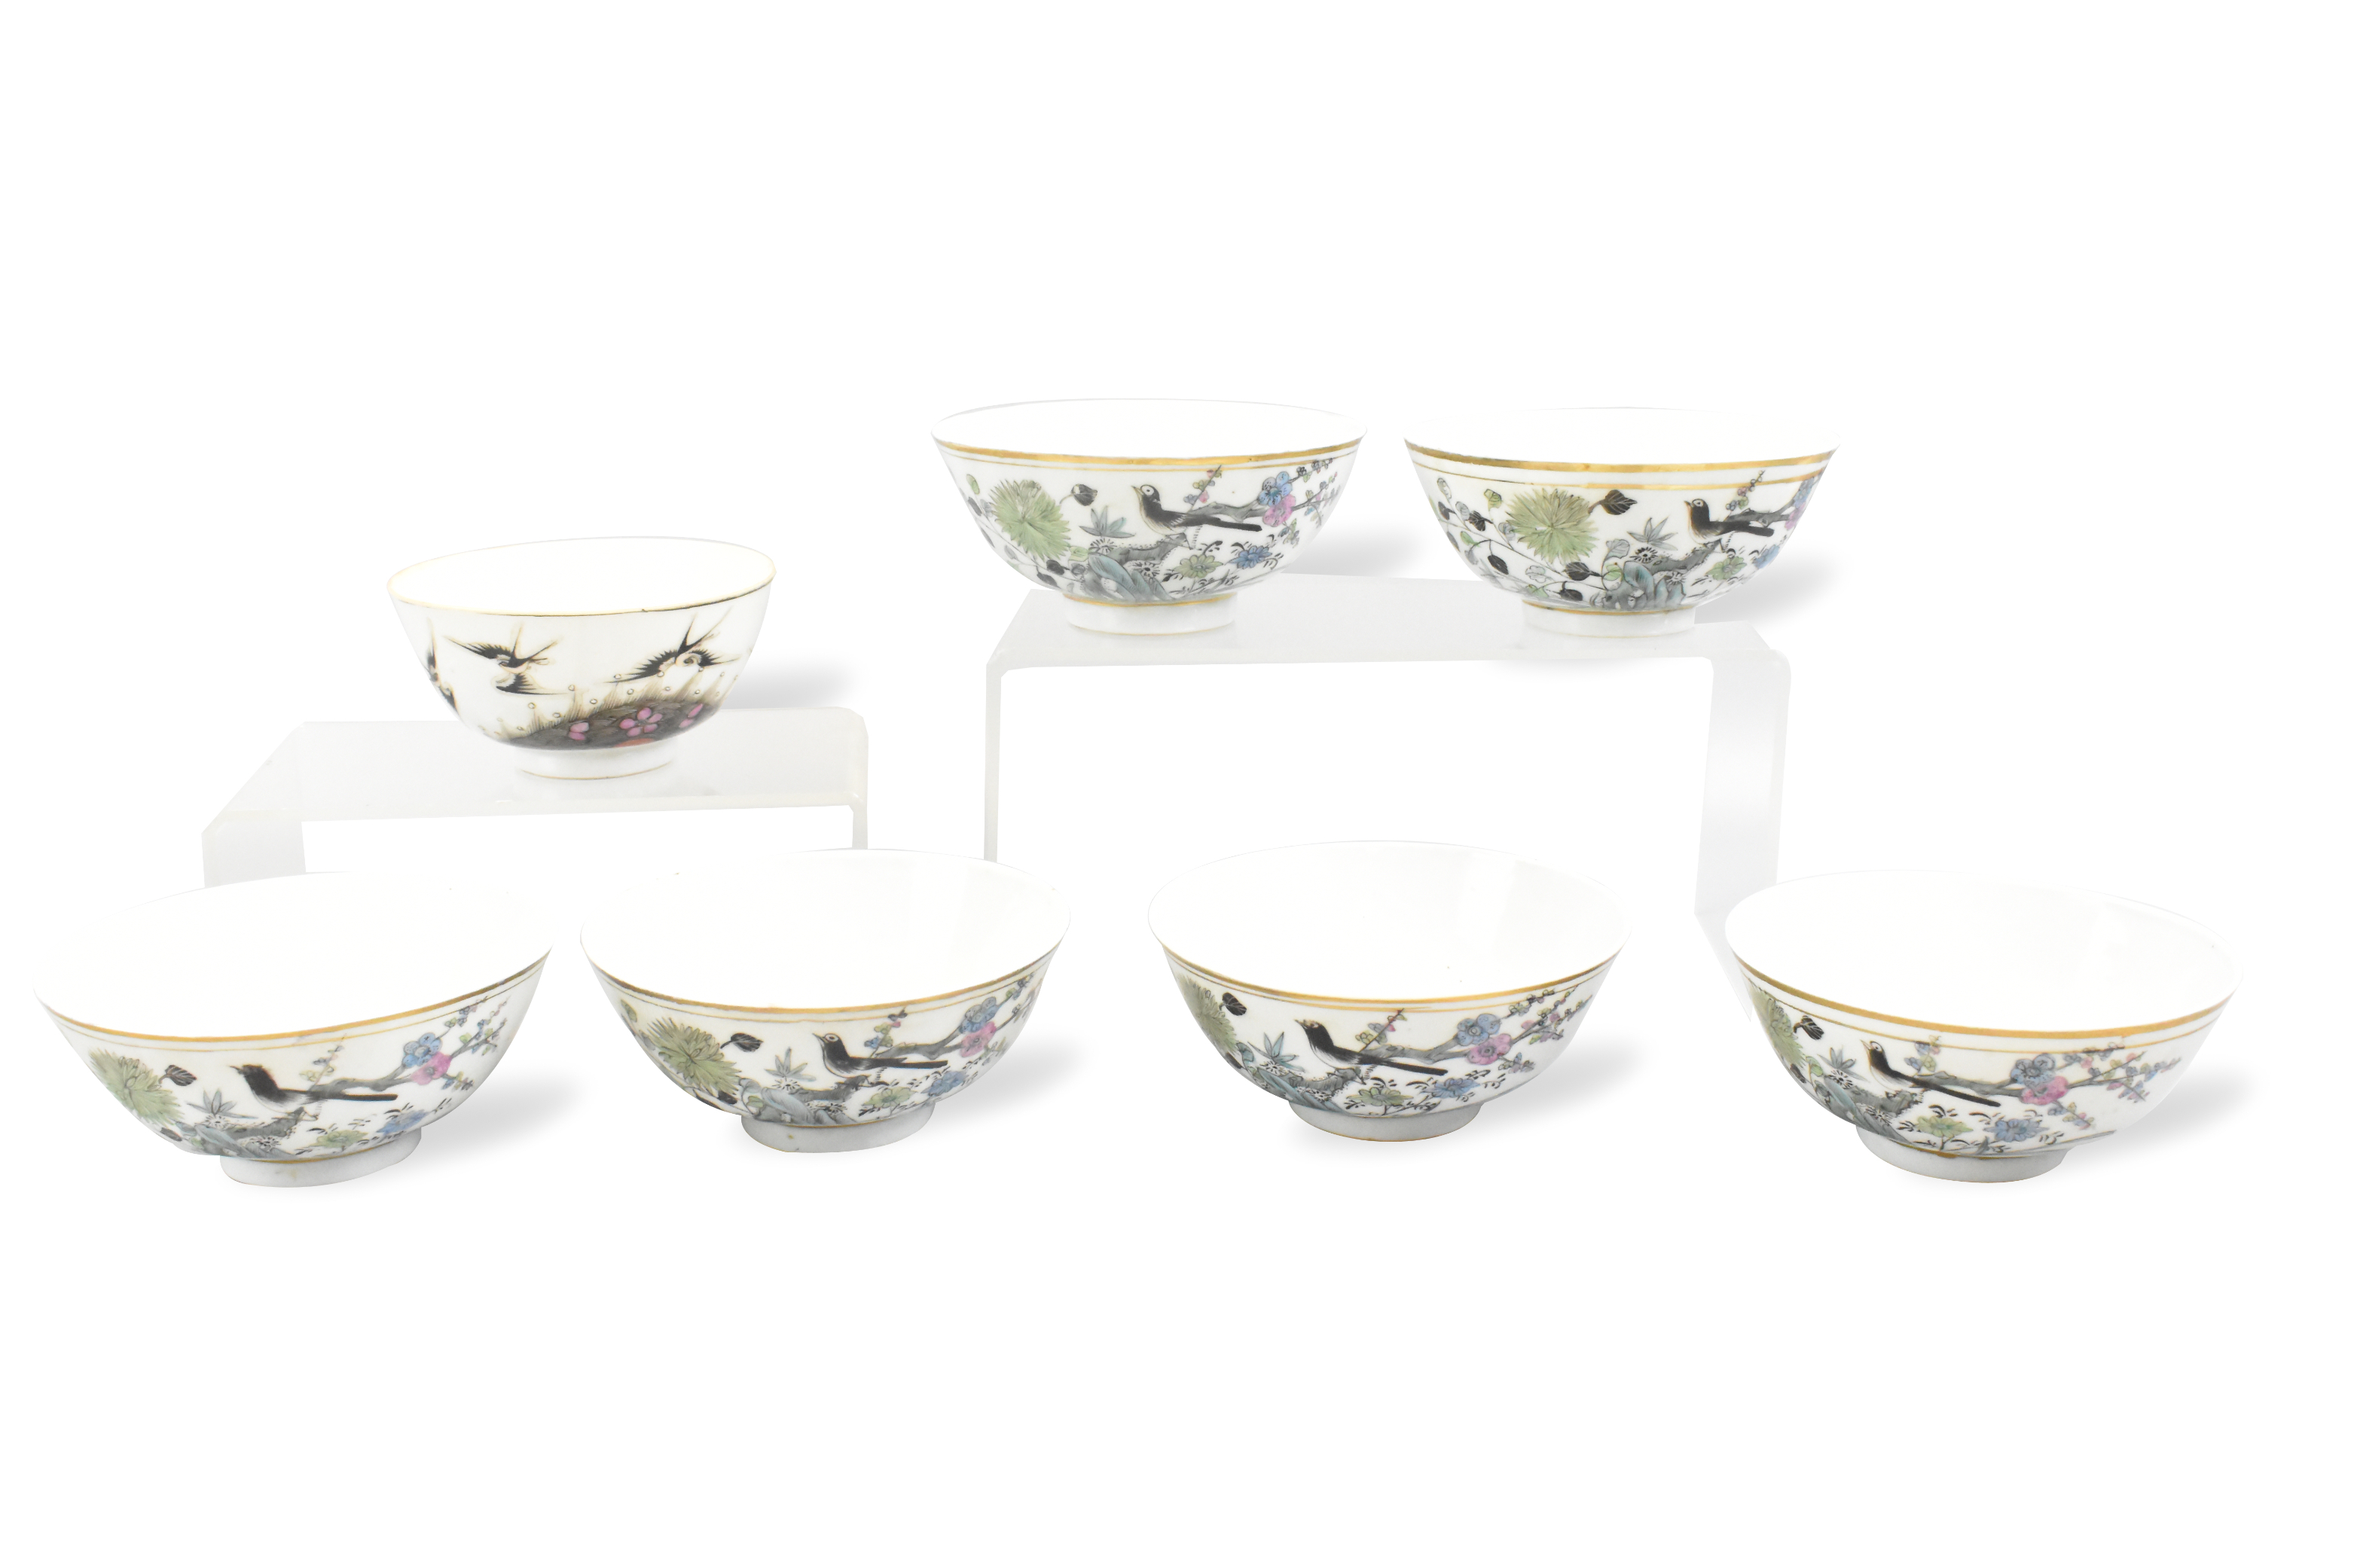 GROUP OF 7 FAMILLE ROSE BOWLS  3019ff